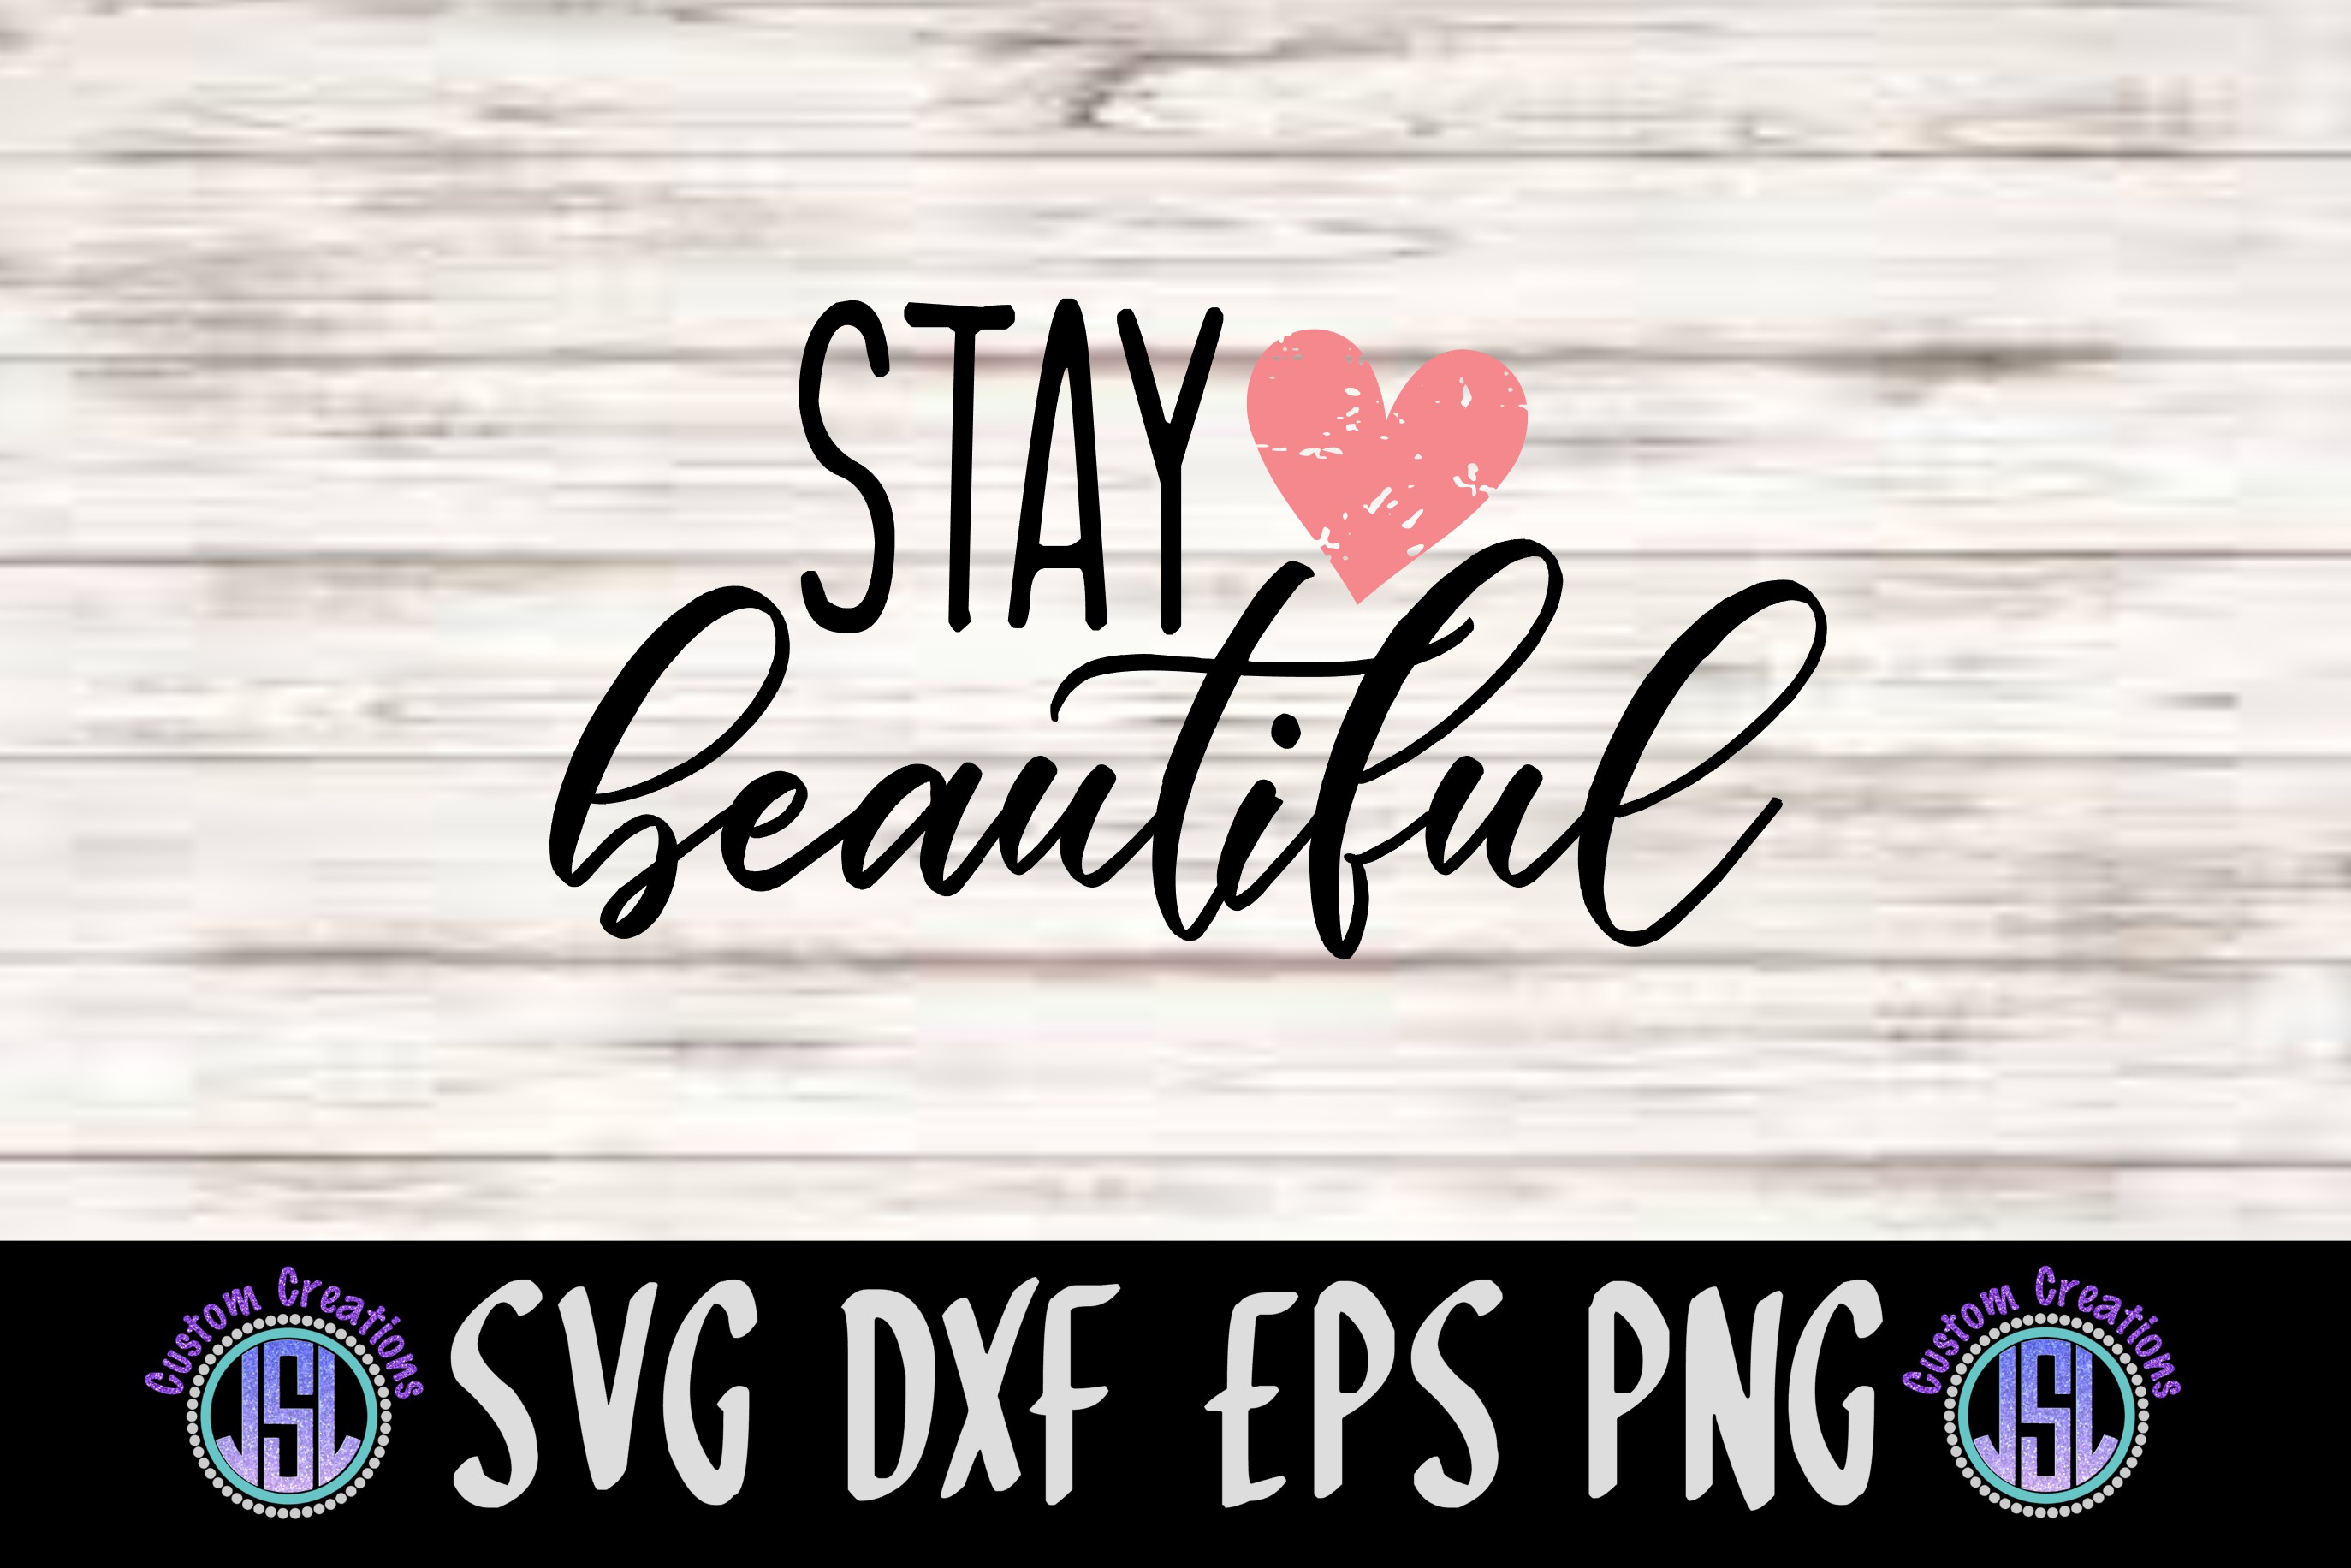 Stay Beautiful Svg Dxf Eps Png Cut Files